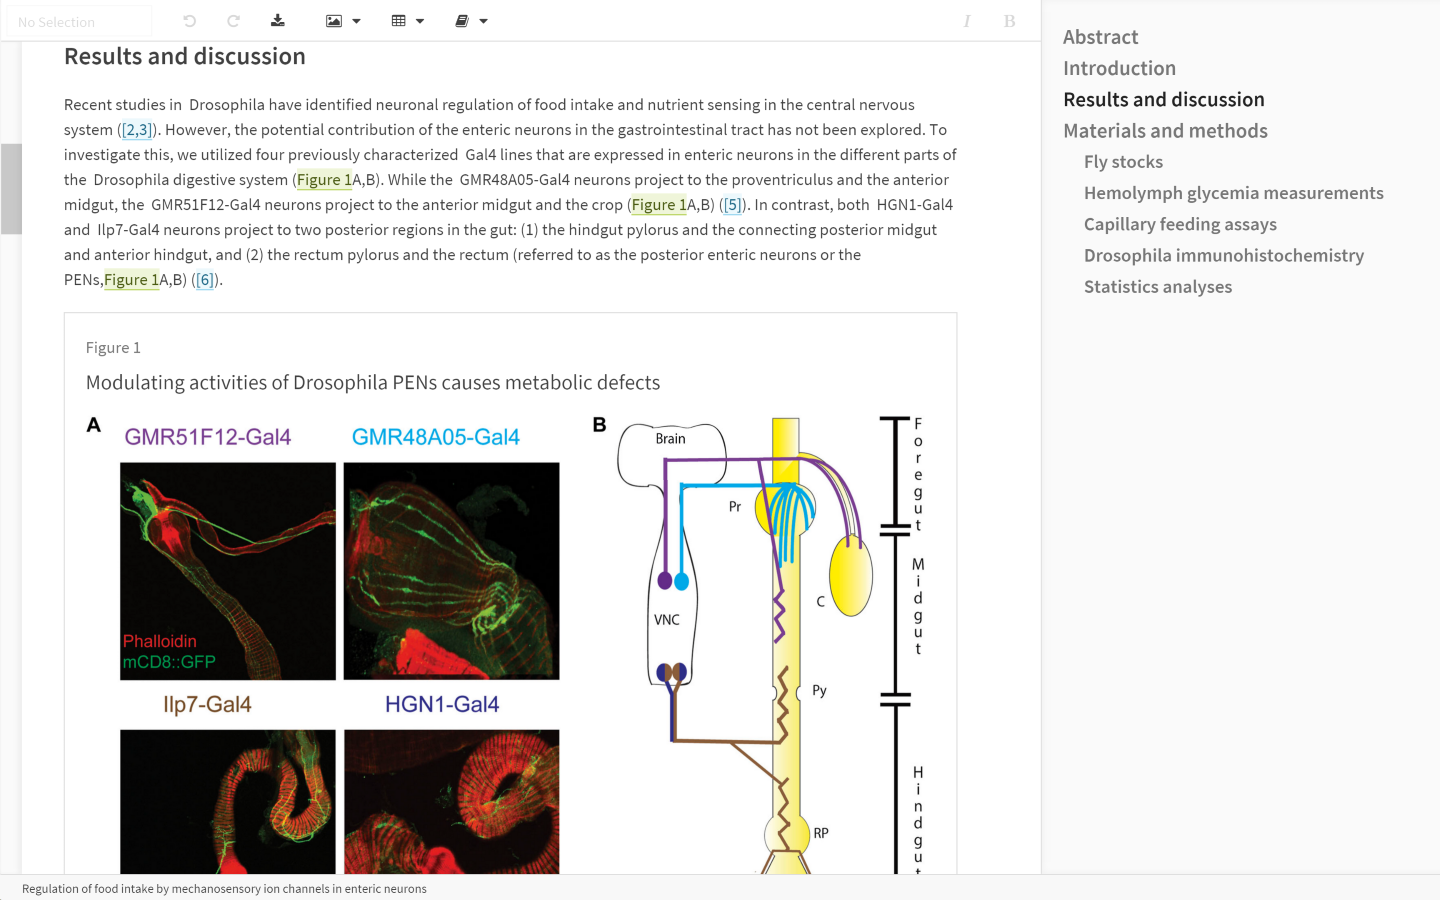 Lens Writer features a clean, simple interface for creating scientific content